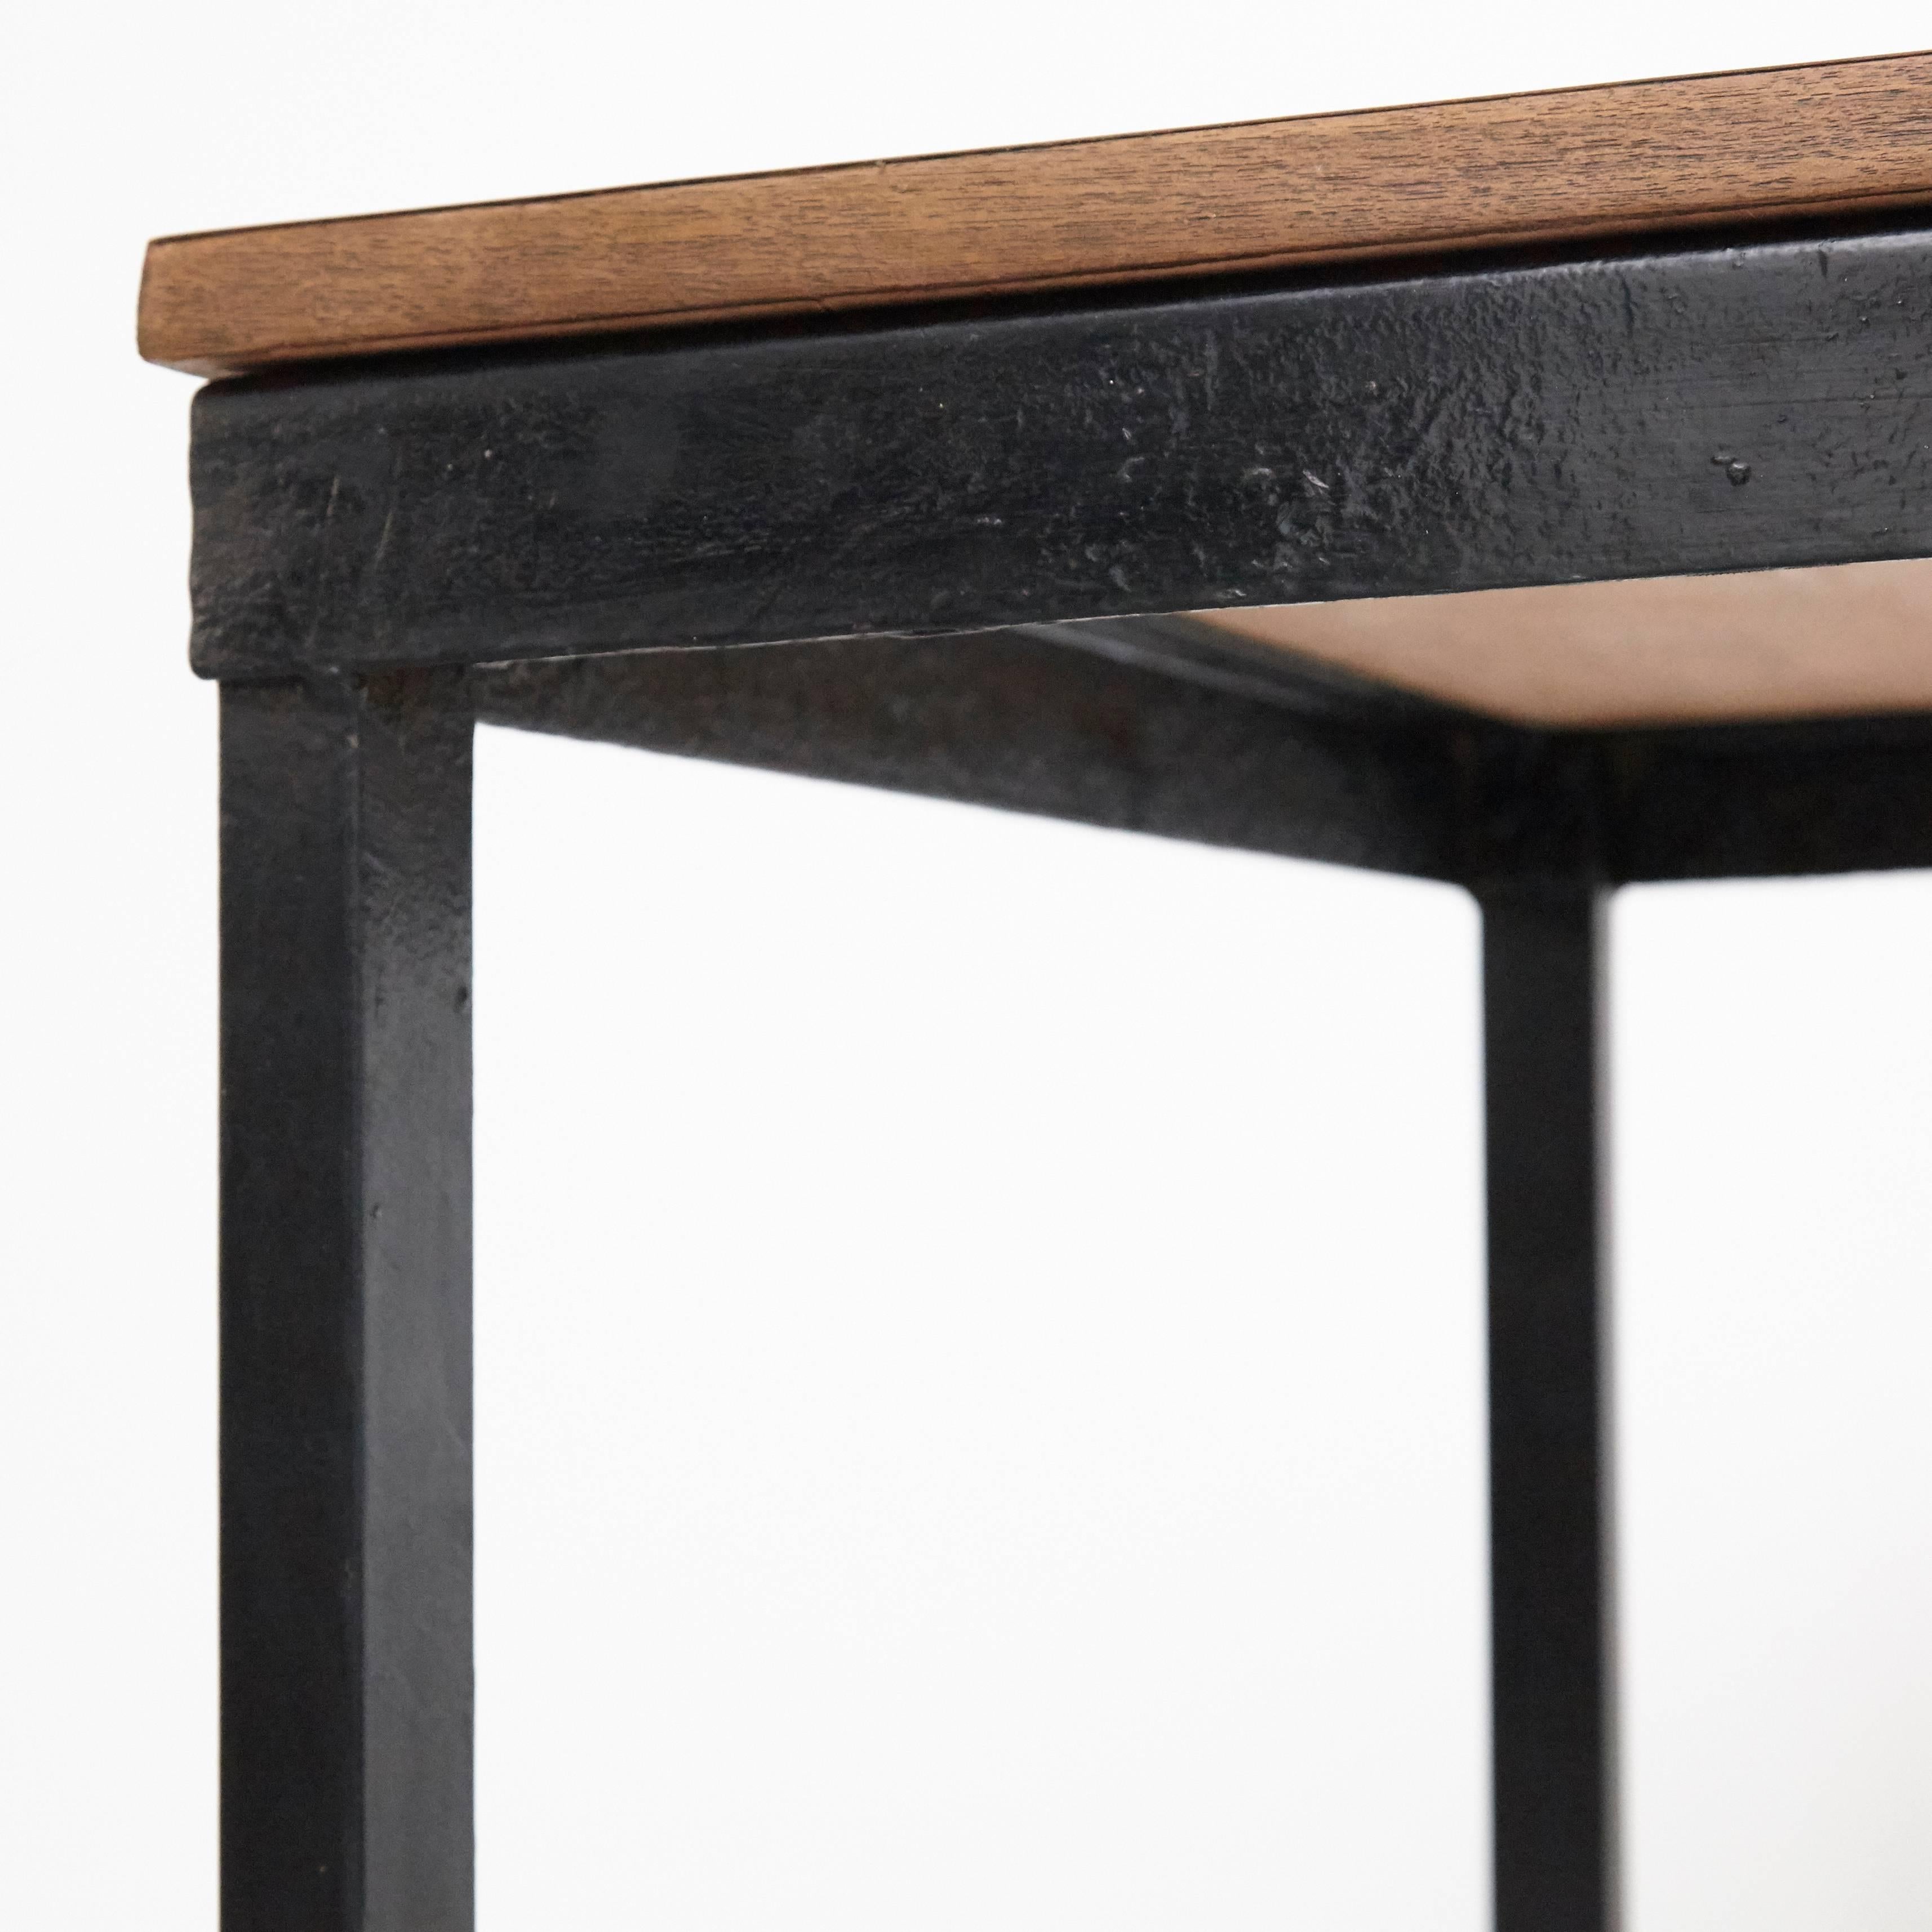 Laminated Charlotte Perriand Metal, Wood and Formica Bridge Table for Cansado, circa 1950